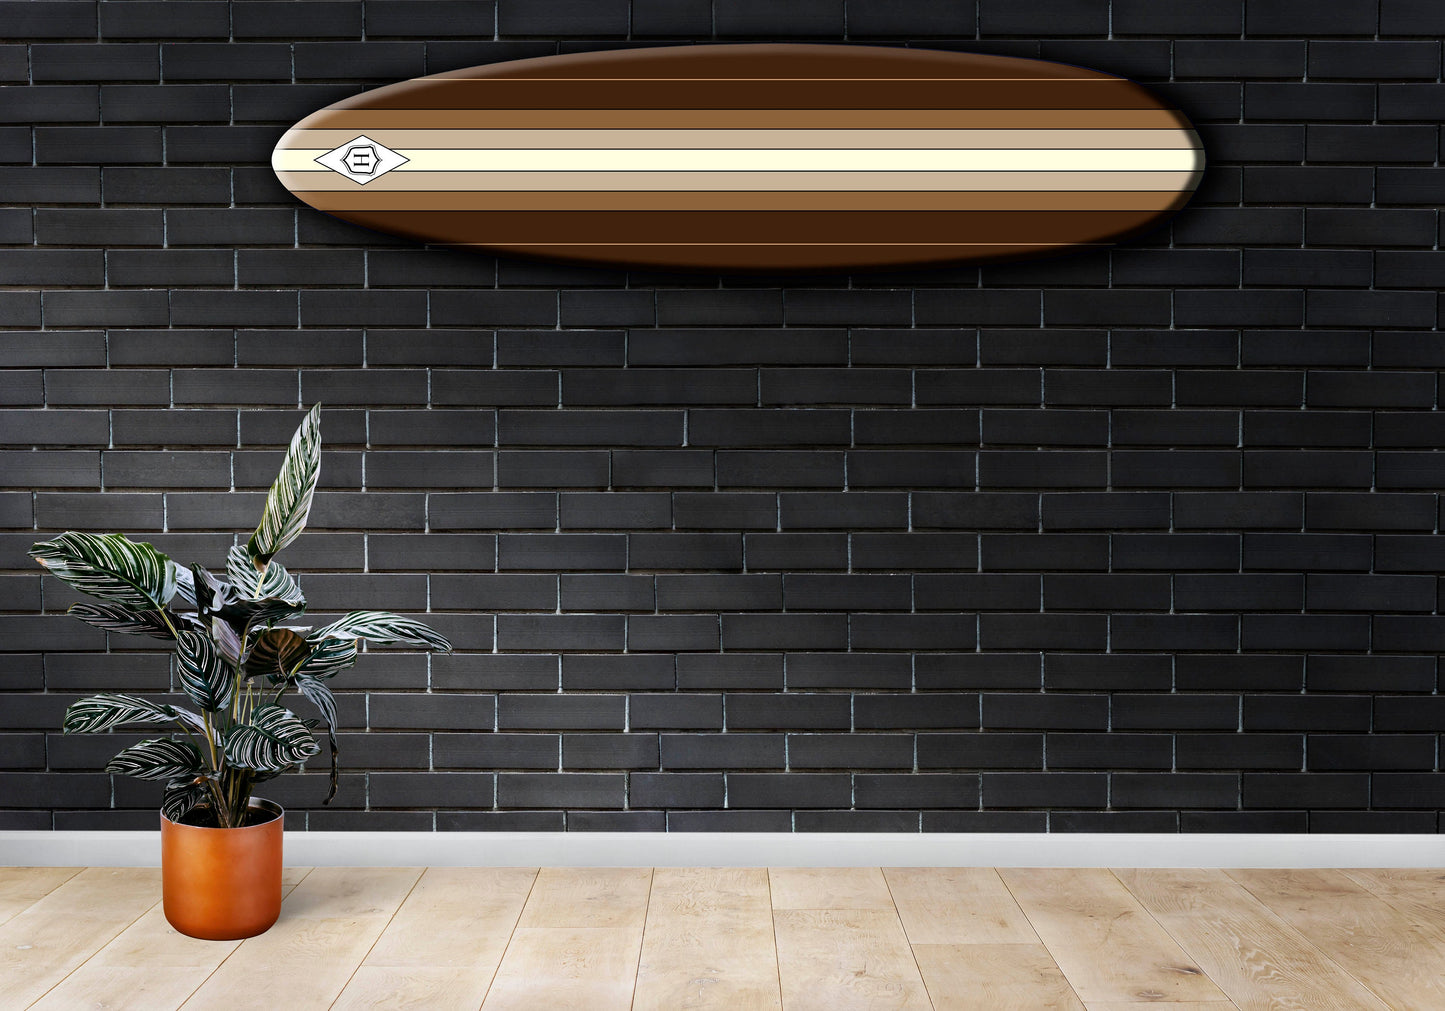 Wooden Surf Wall Sign in Brown, Beige, White Stripes as Surfing Inspired Wall Decor